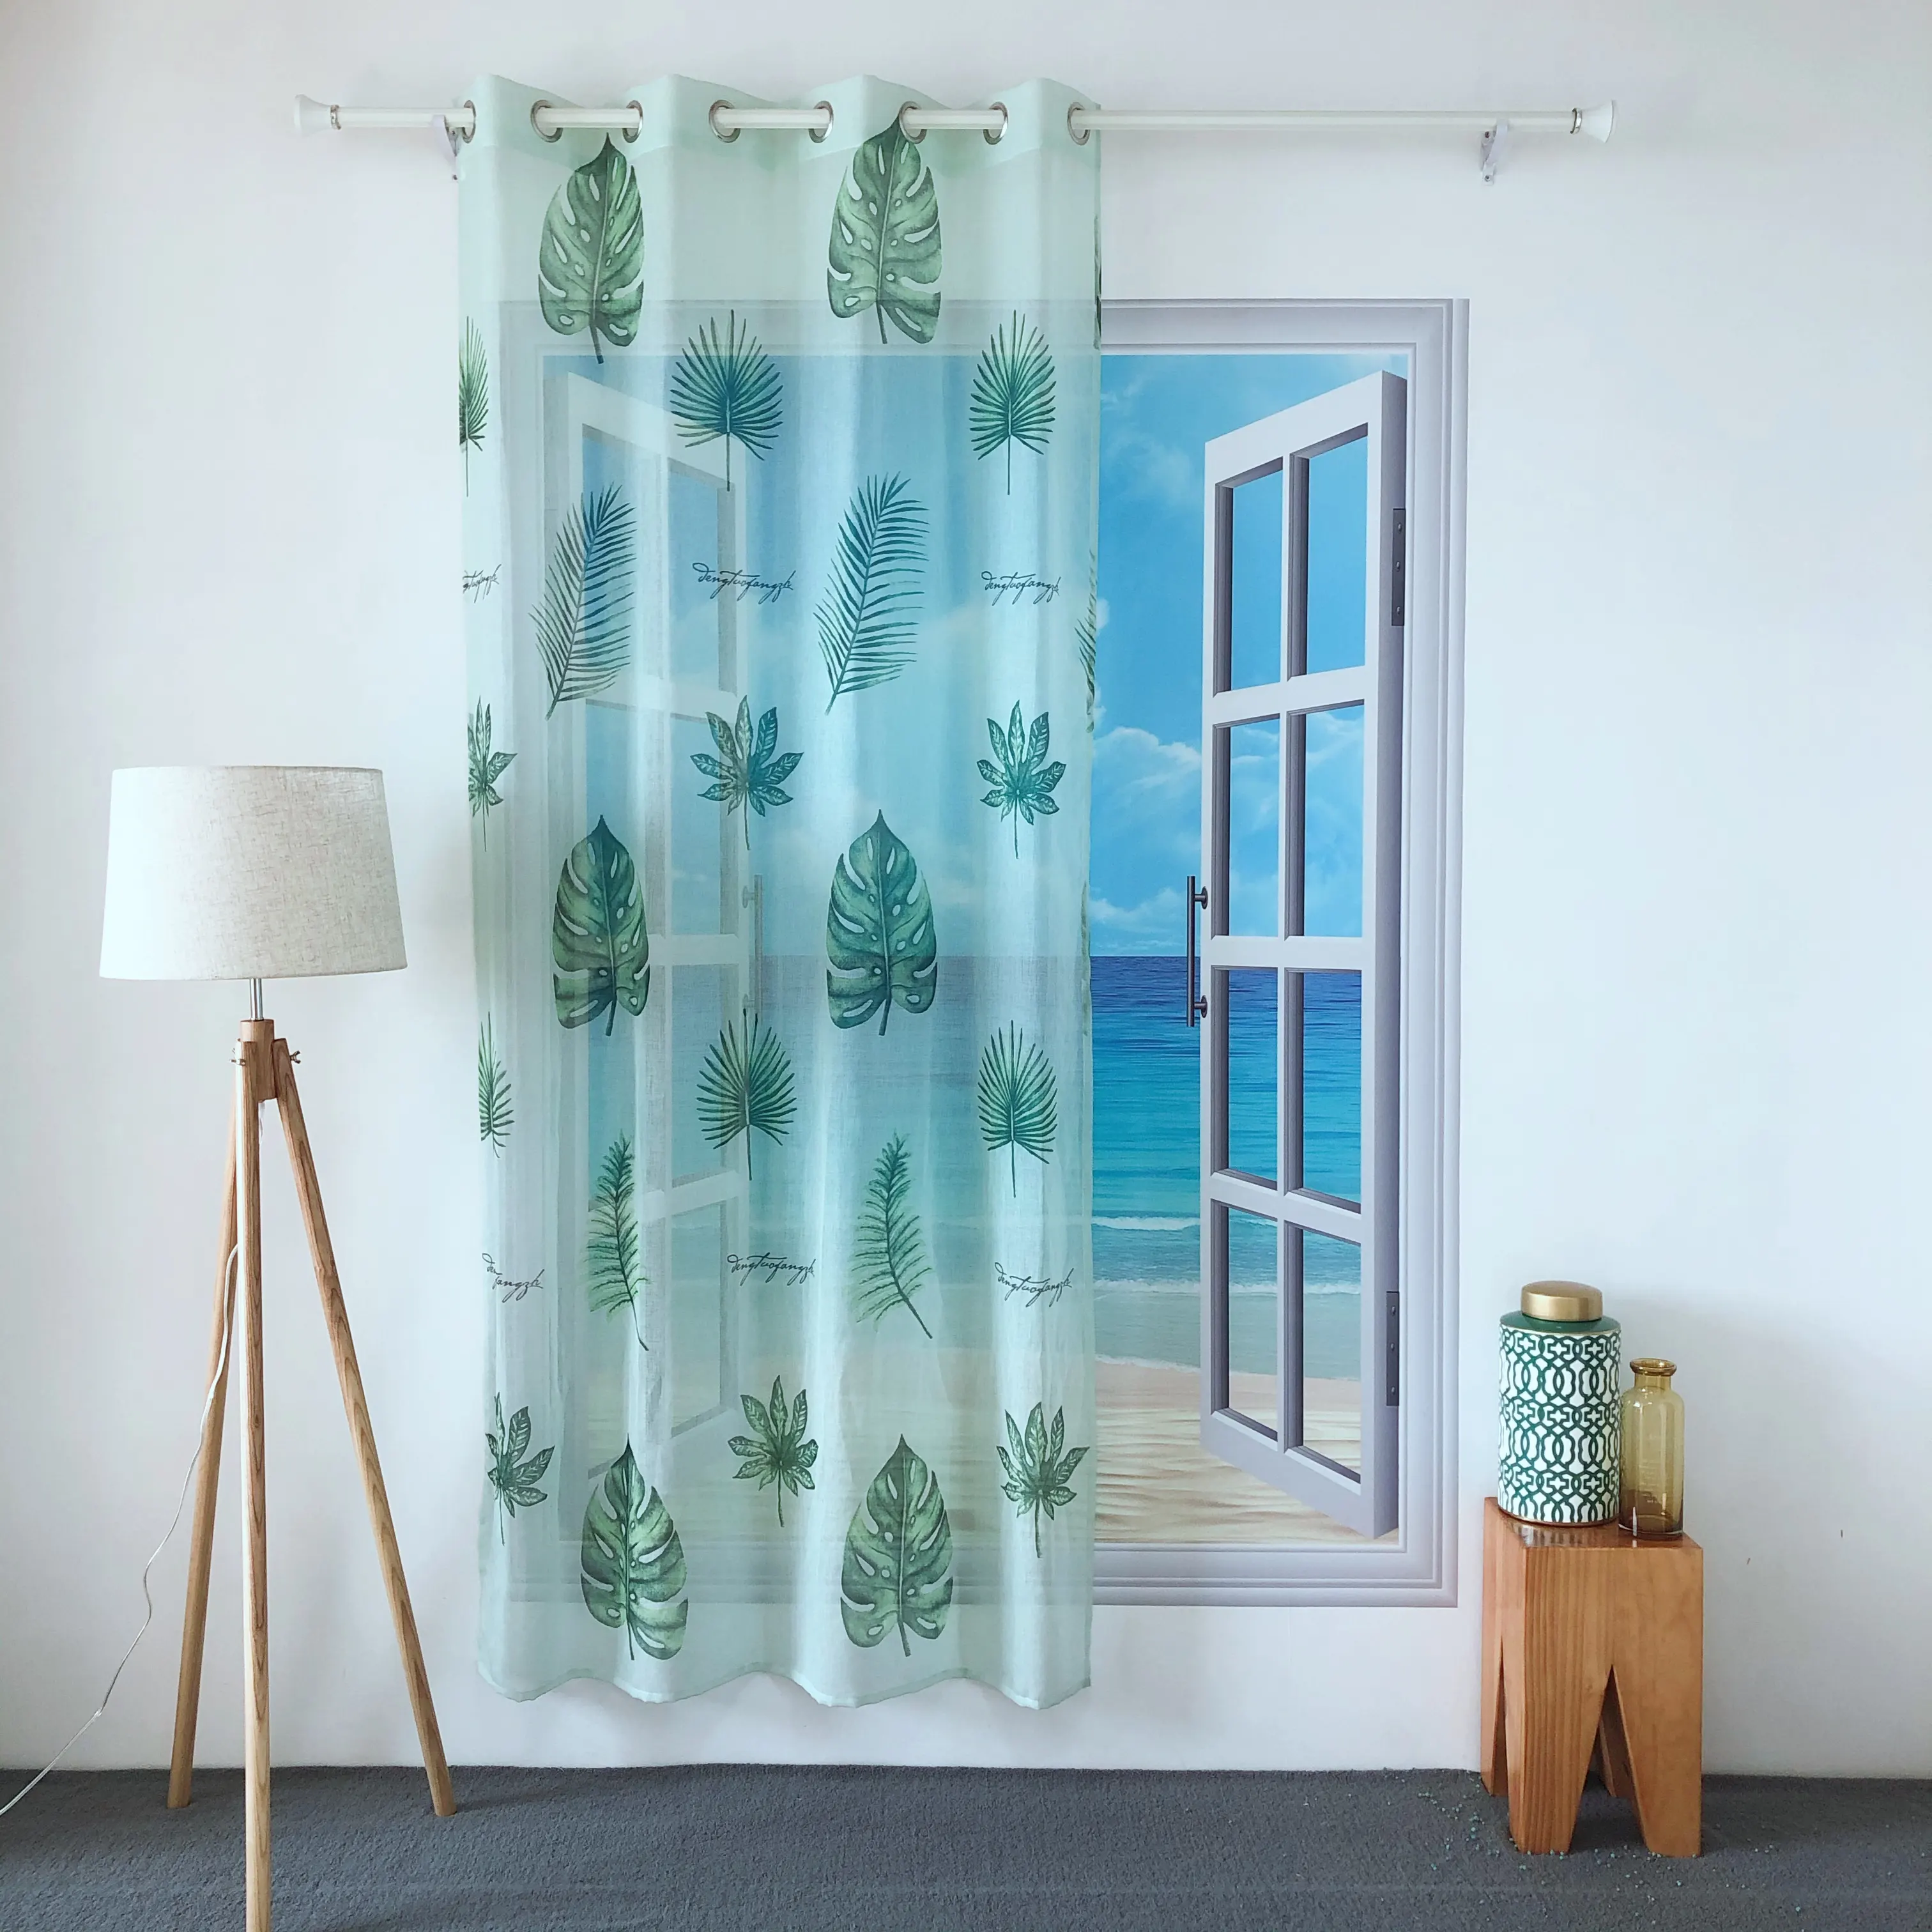 KEQIAO CHINA POLYESTER PLAIN VOILE DOLLY GREEN MONSRERA LEAVES GREEN PRINTING SHEER PANEL CURTAIN SPRING SUMMER PT-20 TULLE